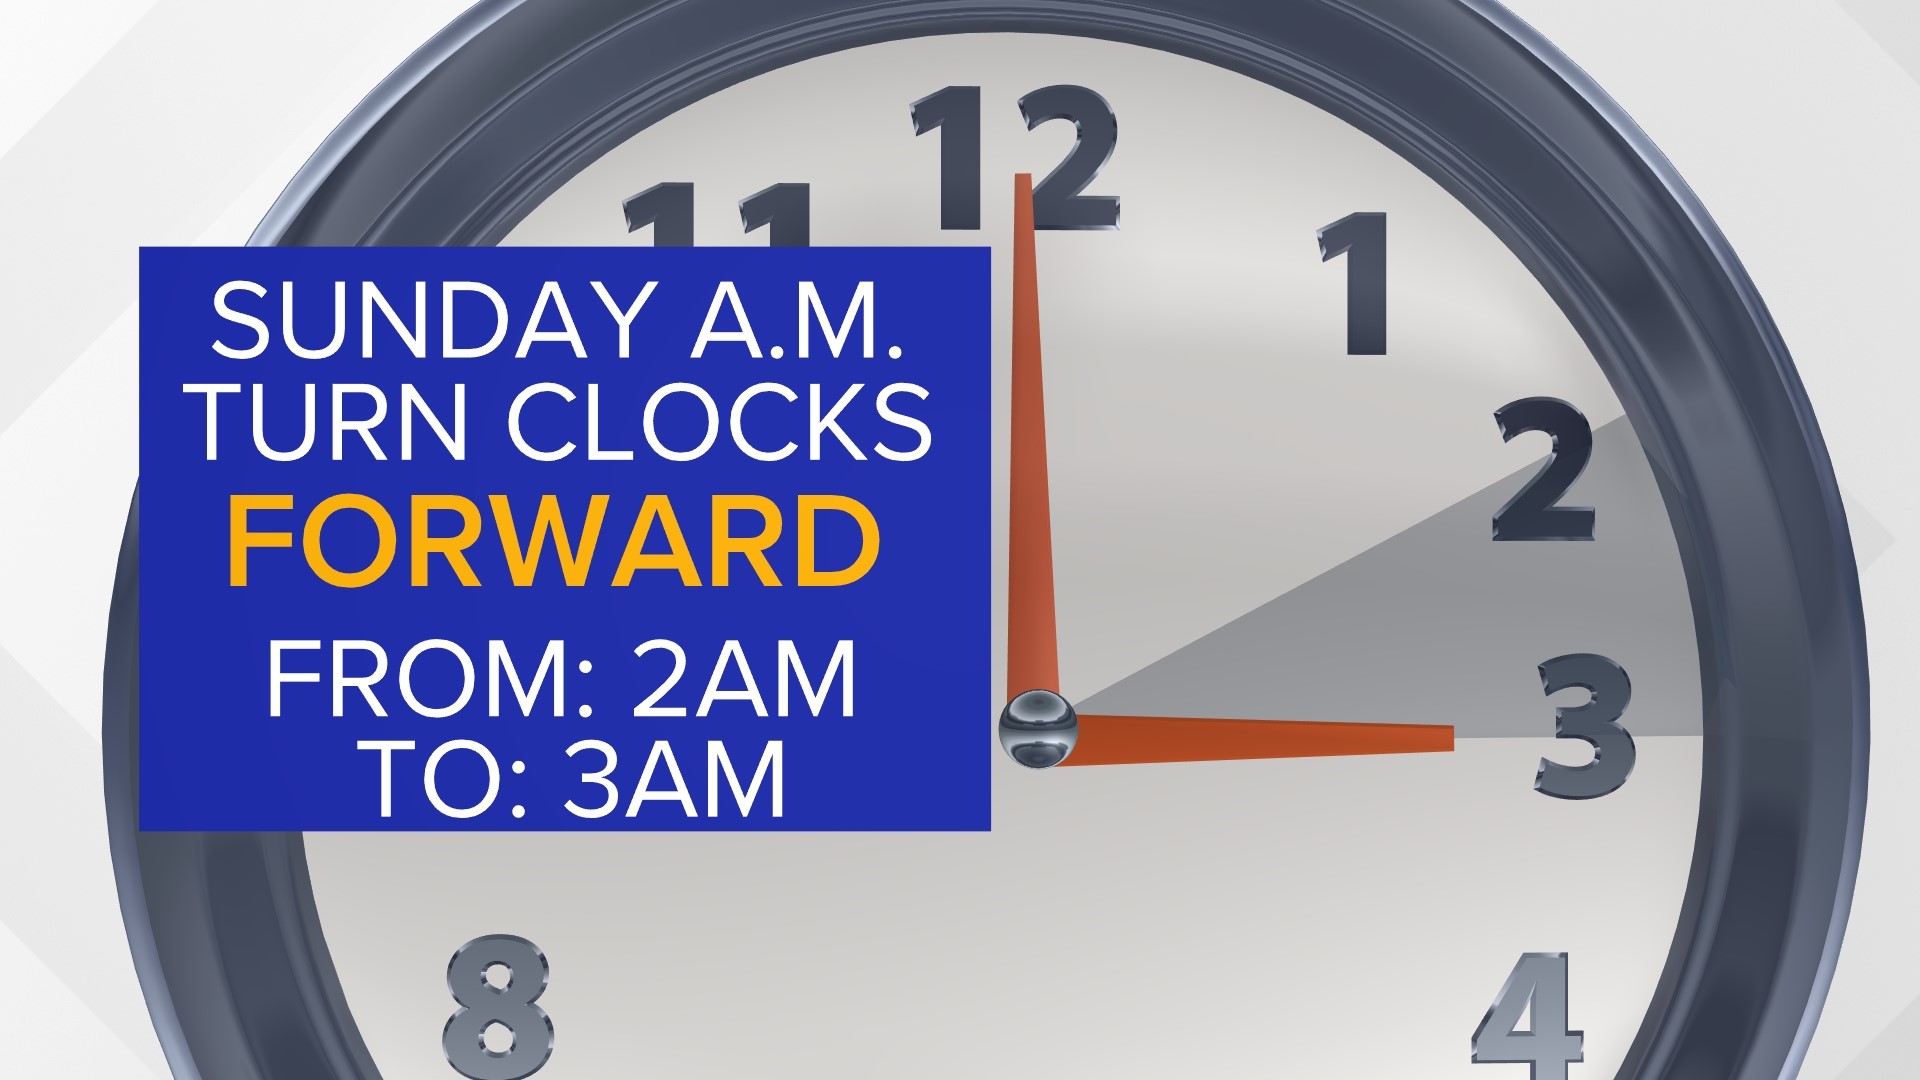 Expect the sun to set an hour later and rise an hour later beginning Sunday.